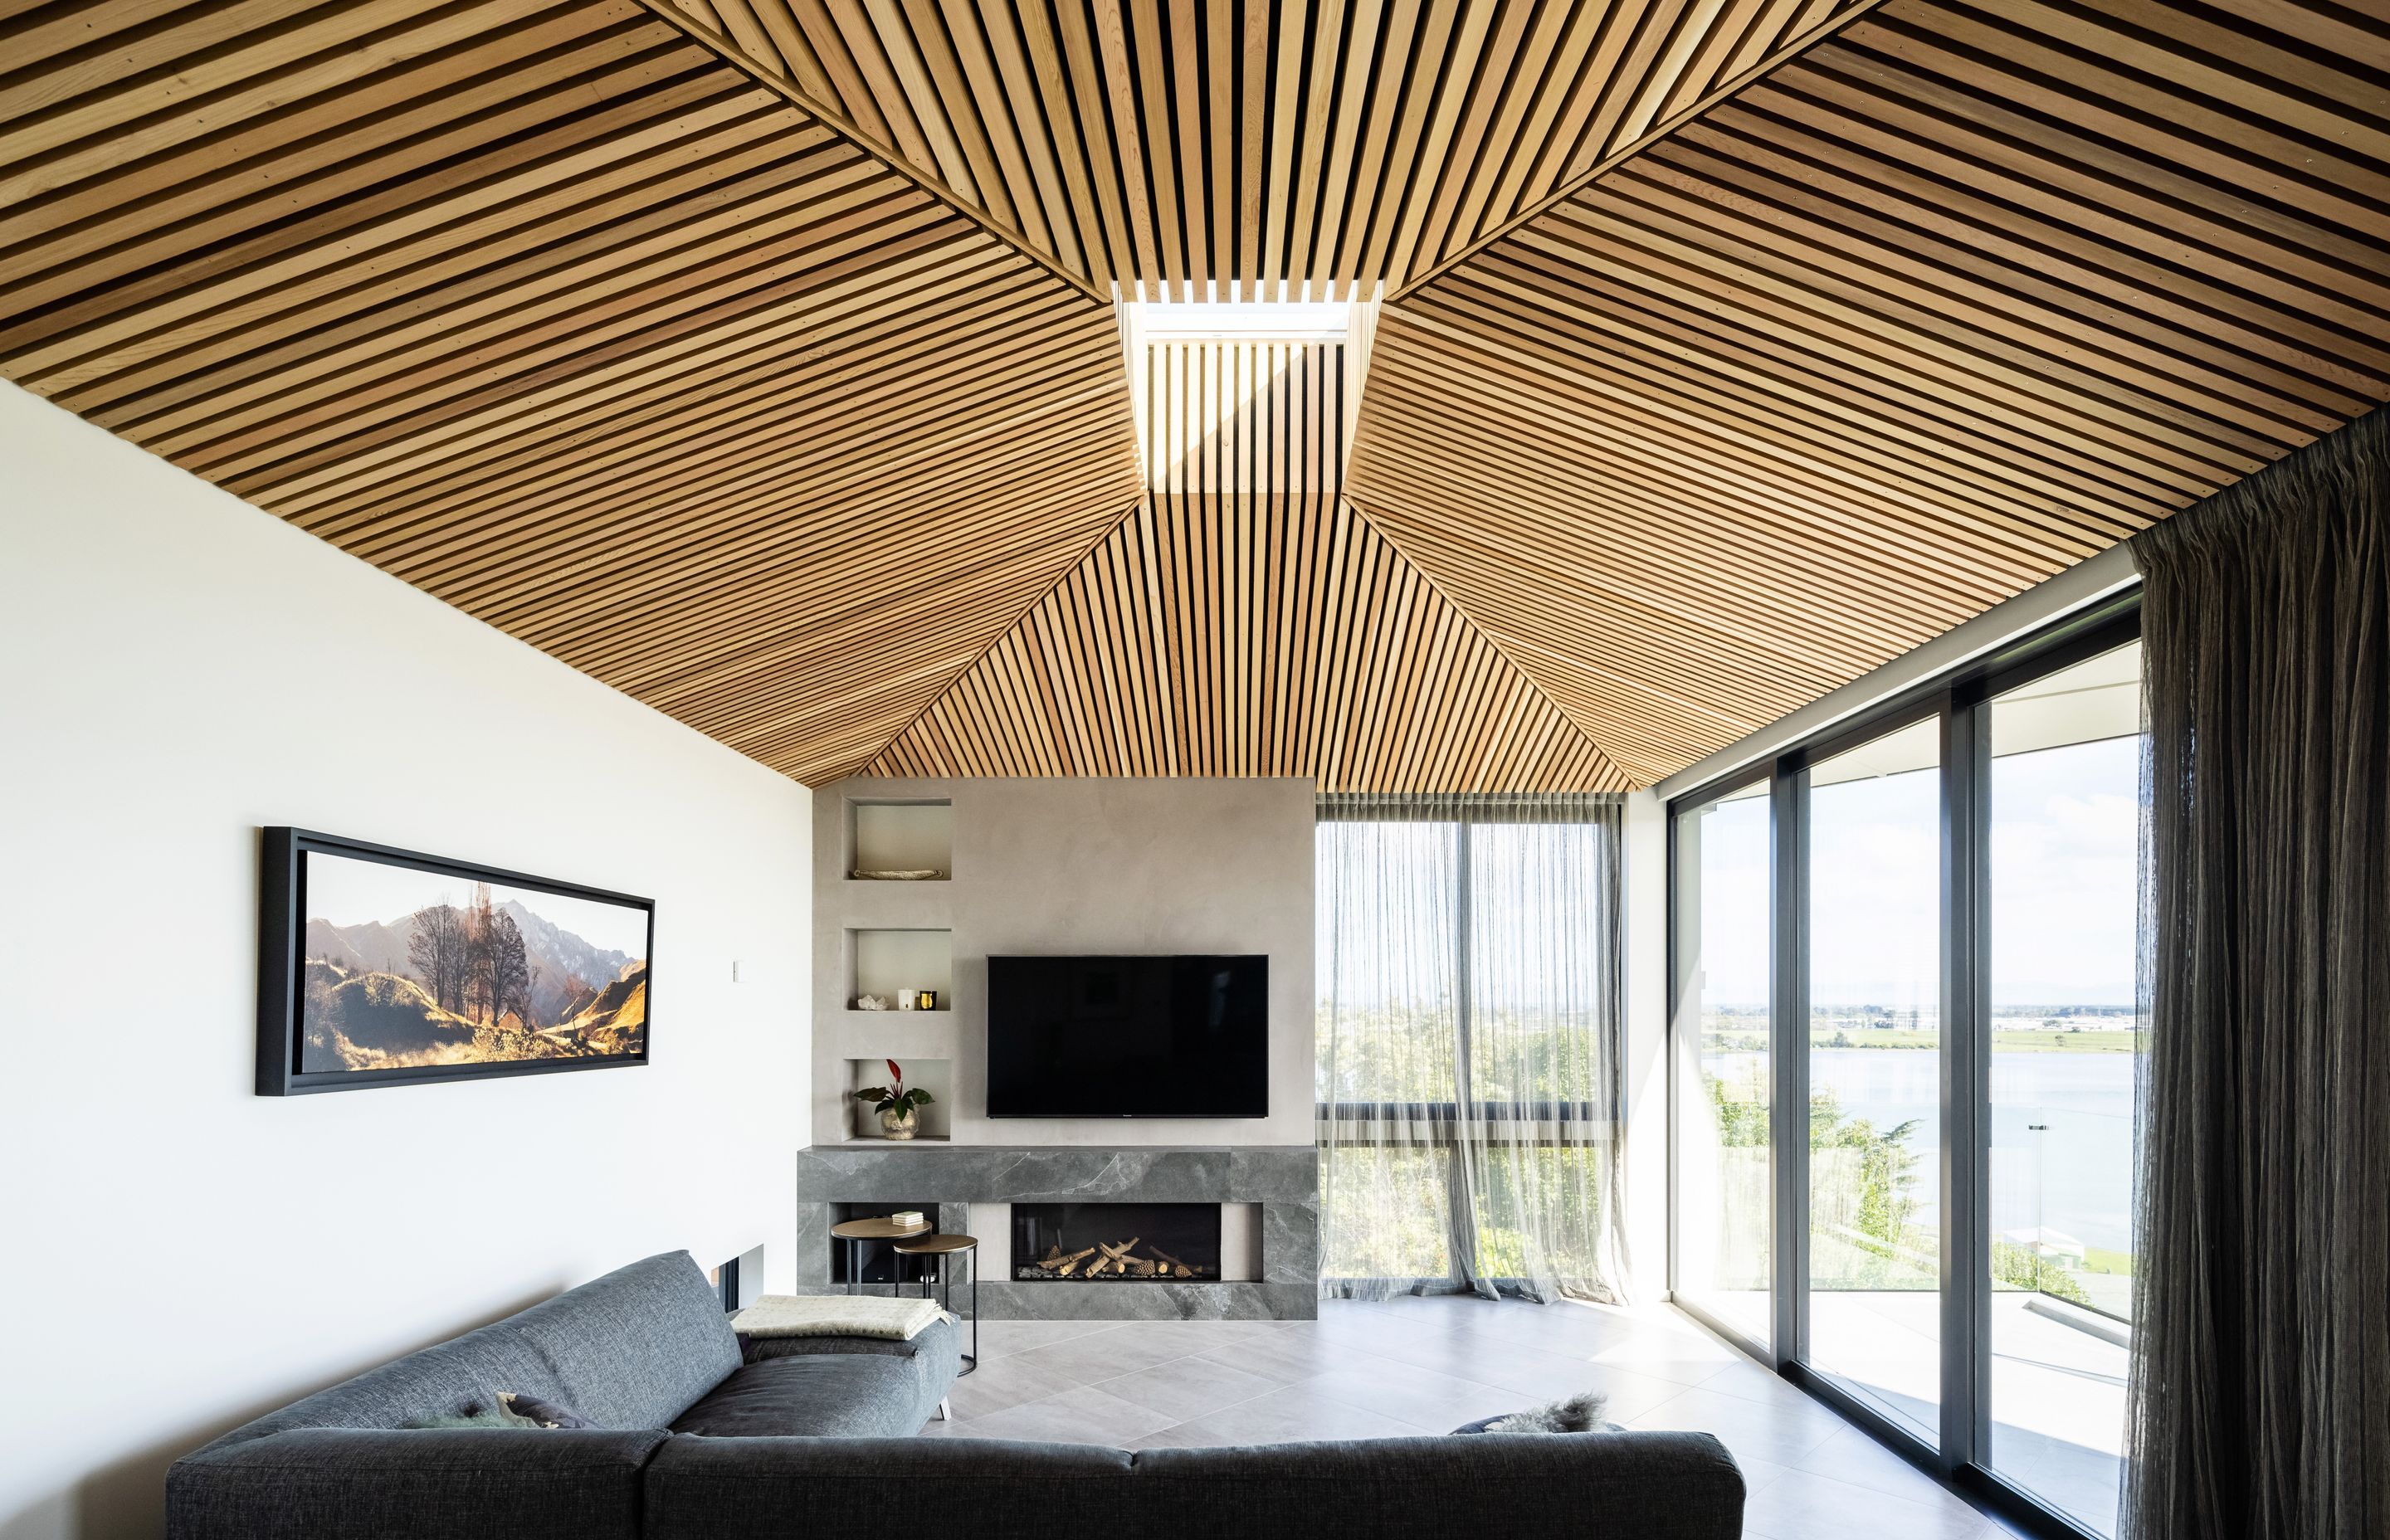 The battened cedar ceiling soars towards a central operable skylight.